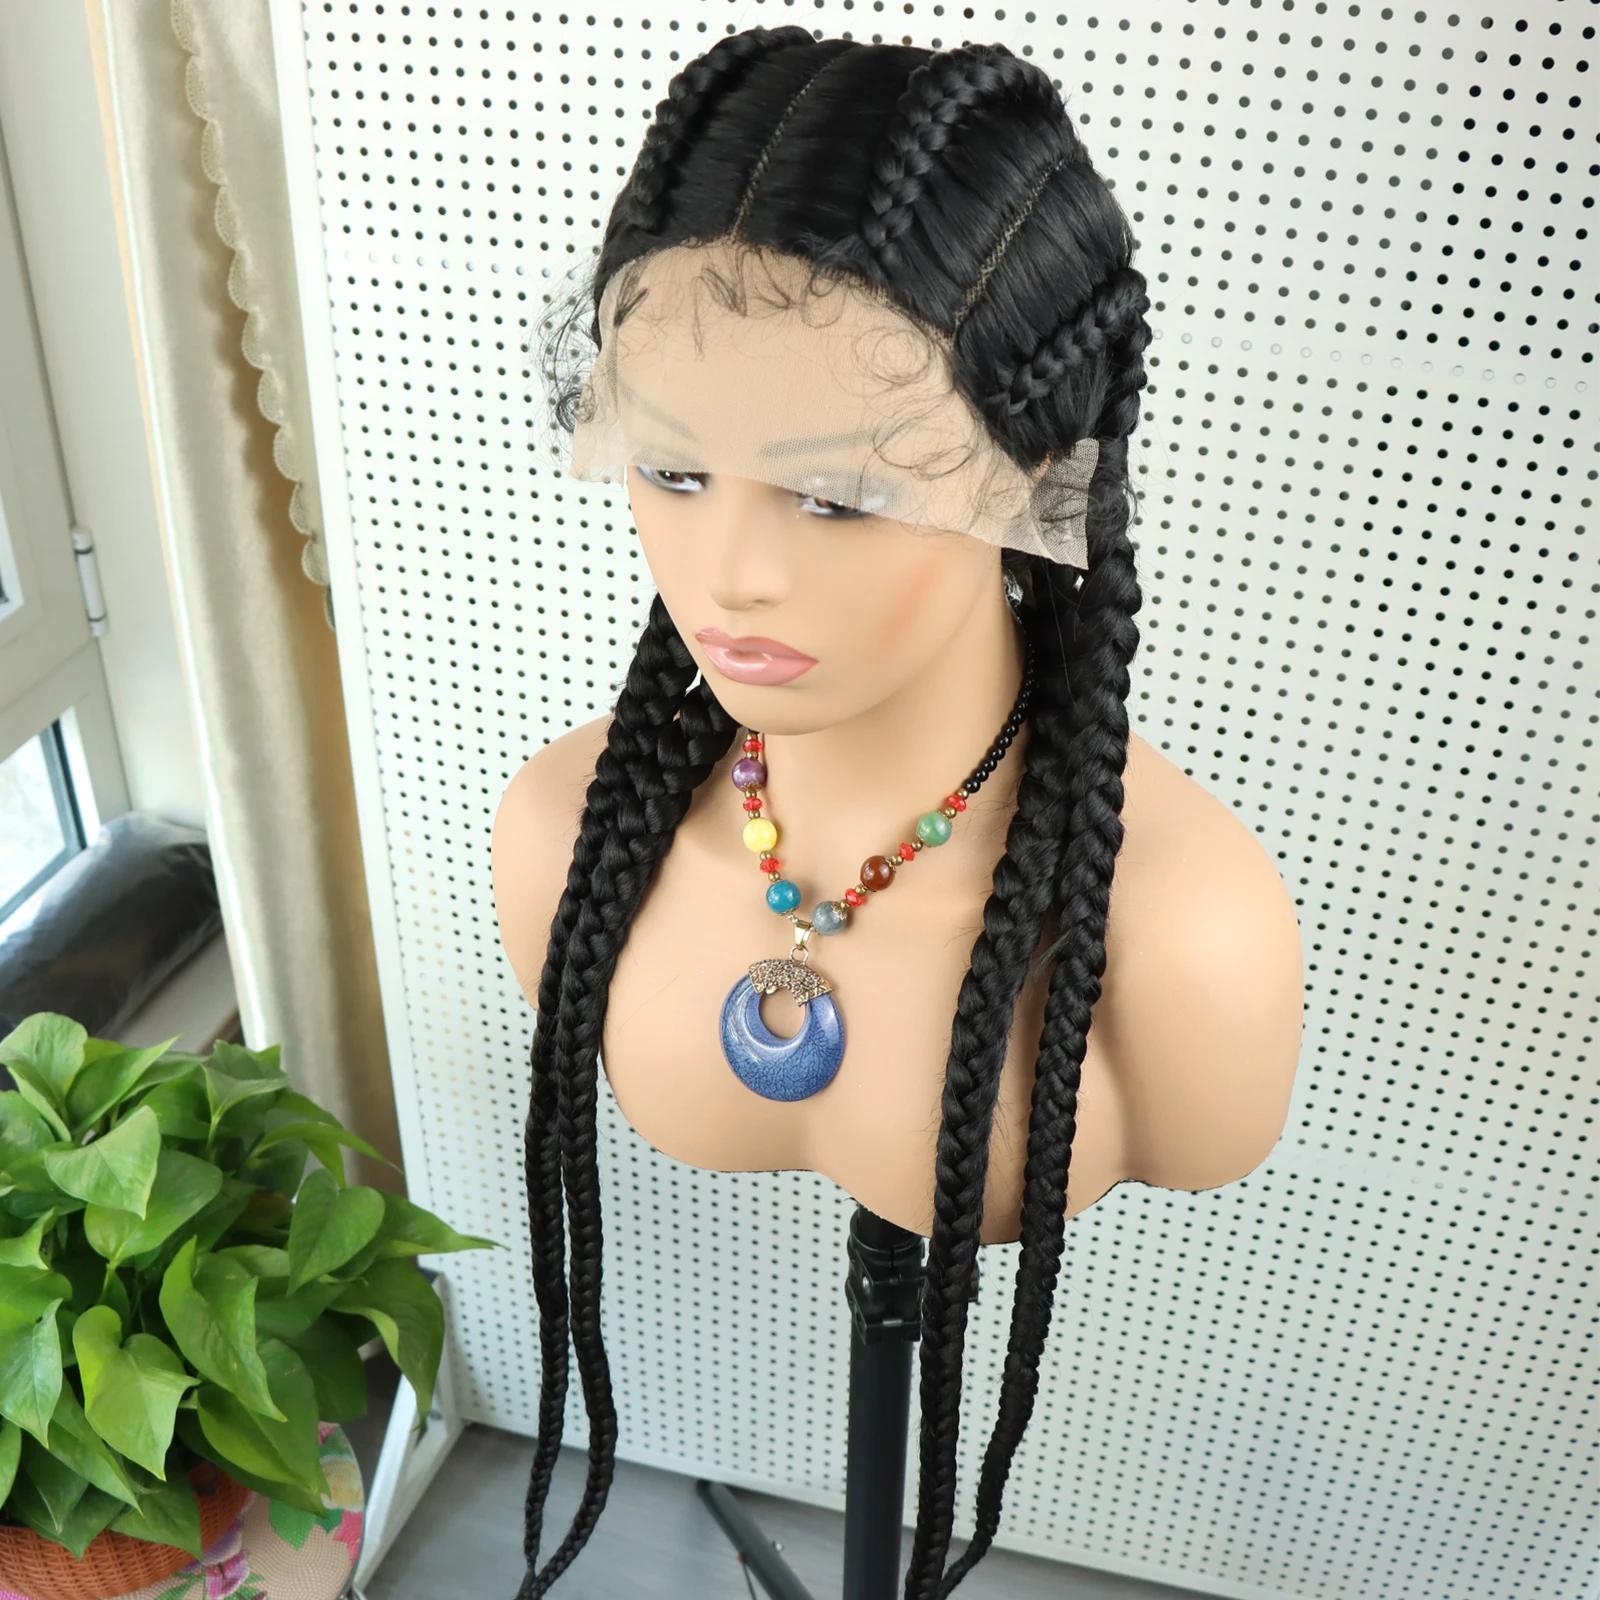 Synthetic braided Lace Front Wig African American Black Color 4 Braids Hair Wig Long Box Braided Twist Lace Wigs For Black Women